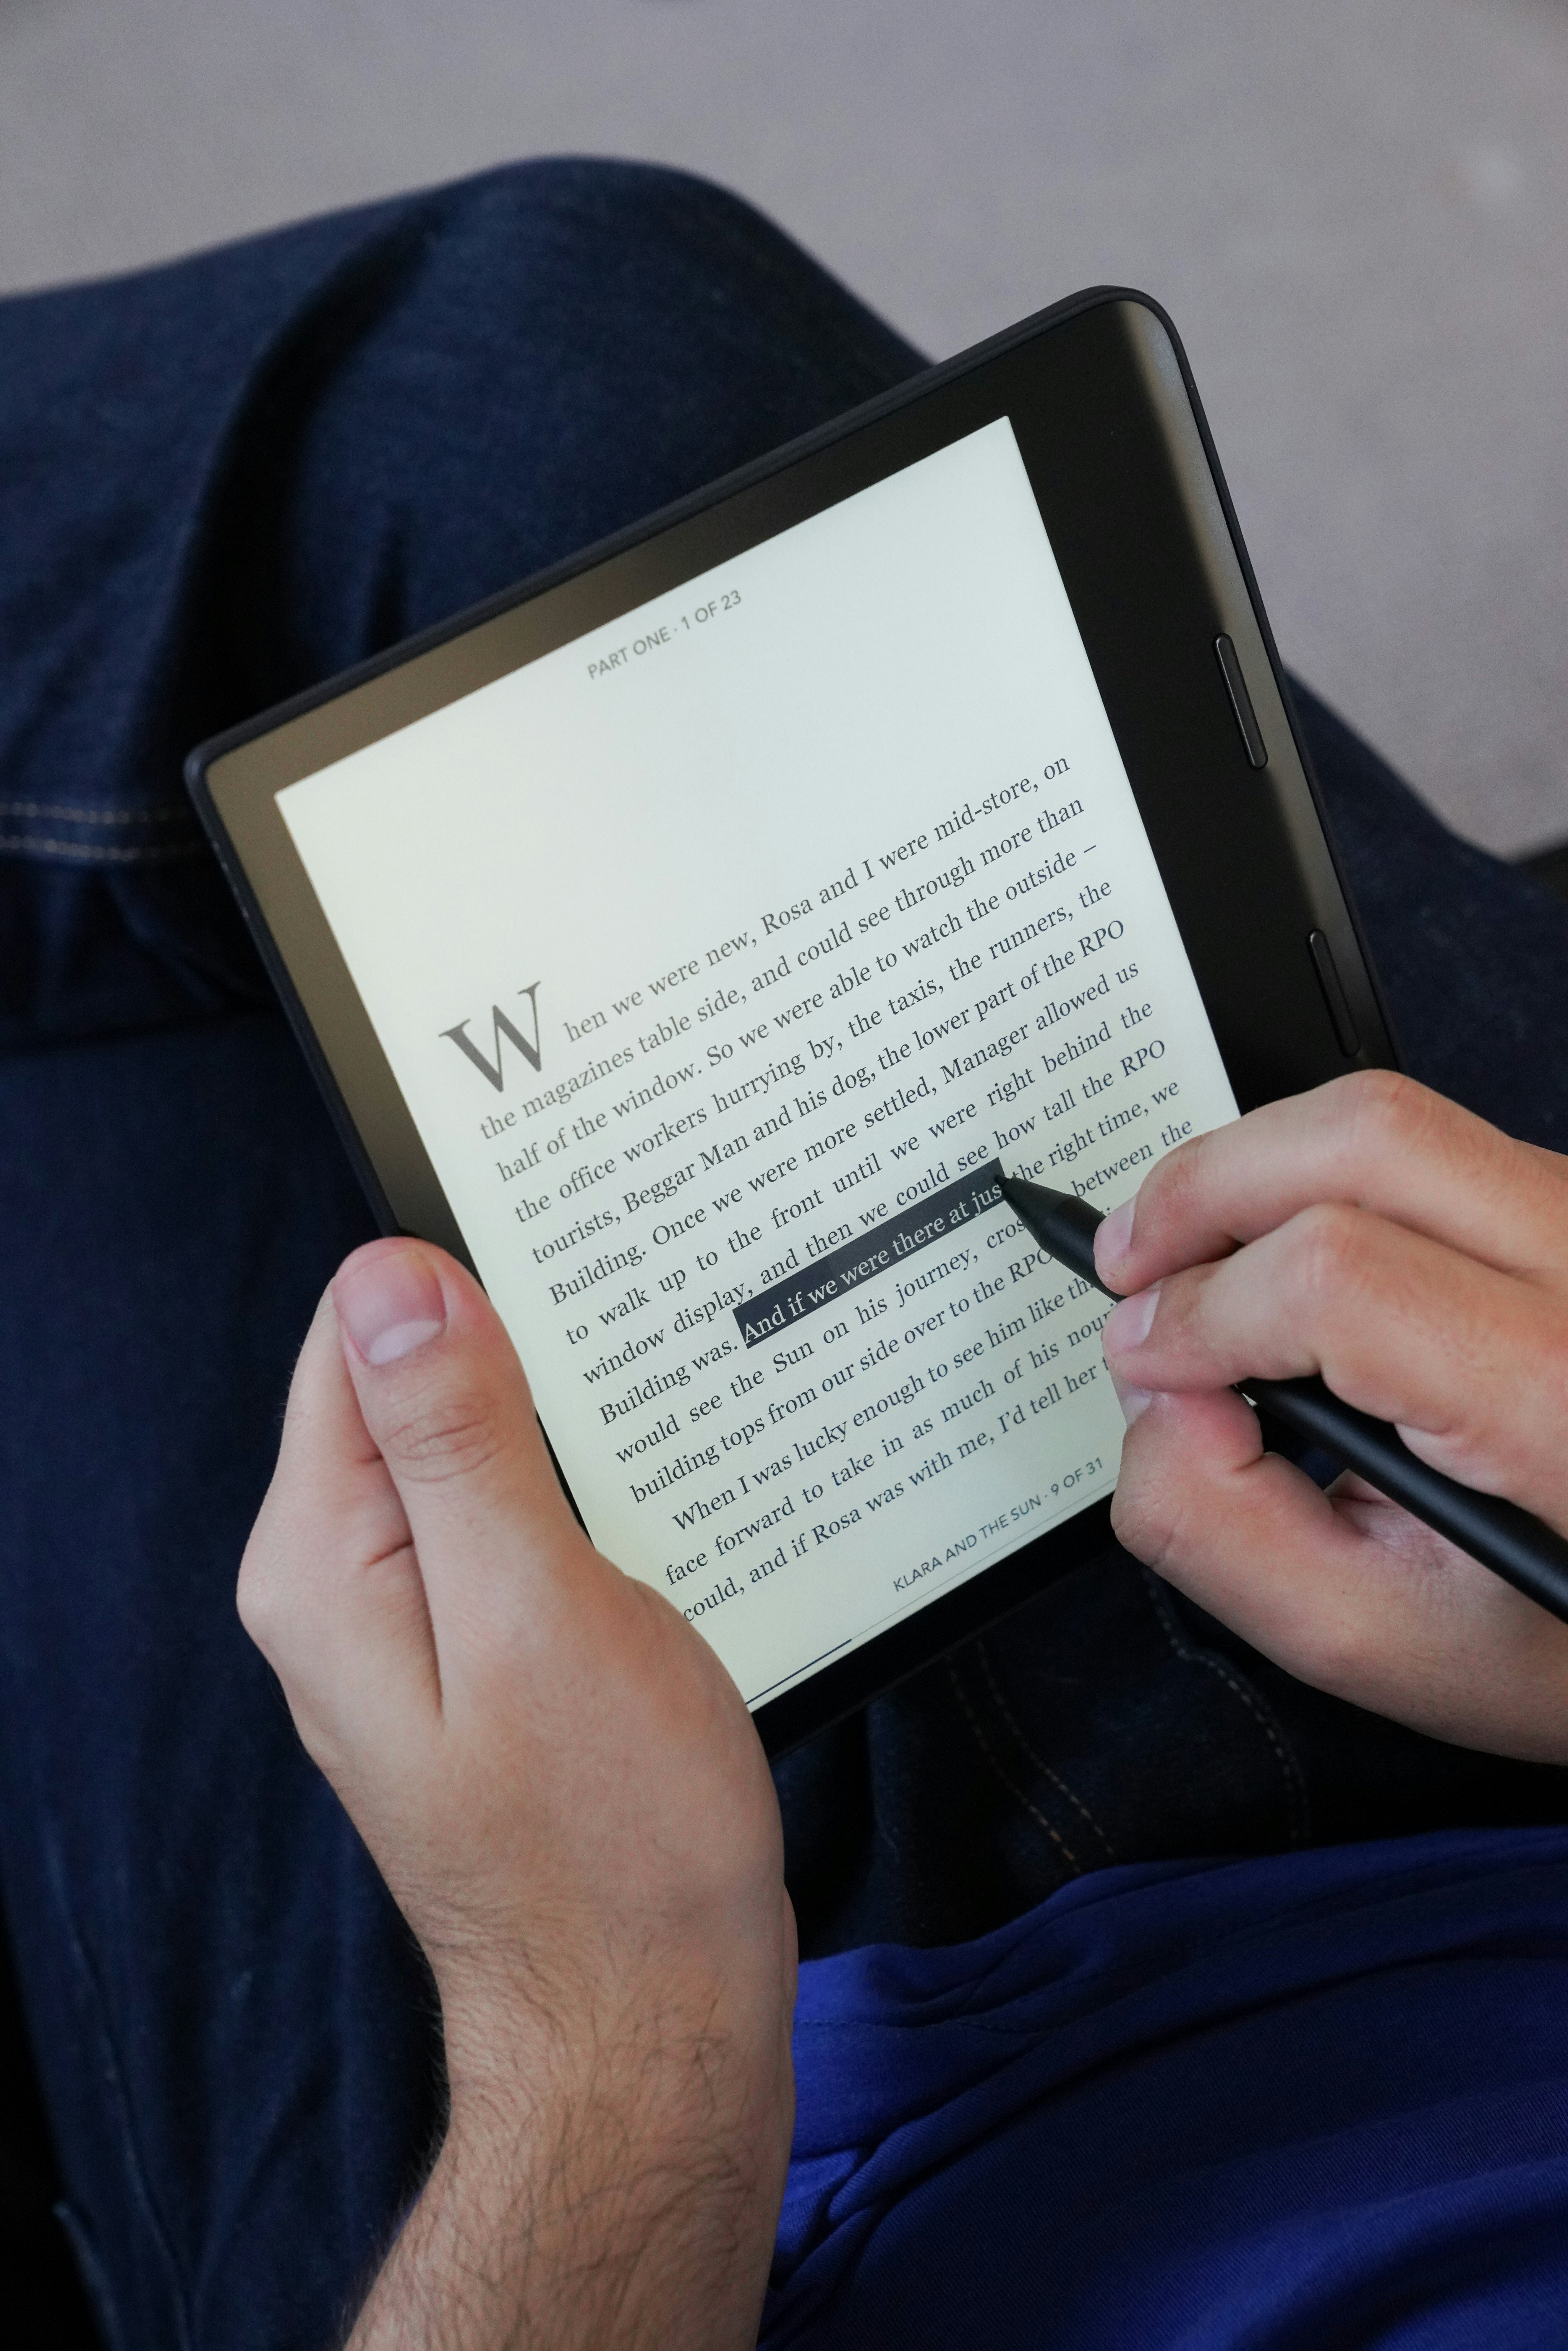 Hands on Review of the Kobo Sage e-reader - Good e-Reader